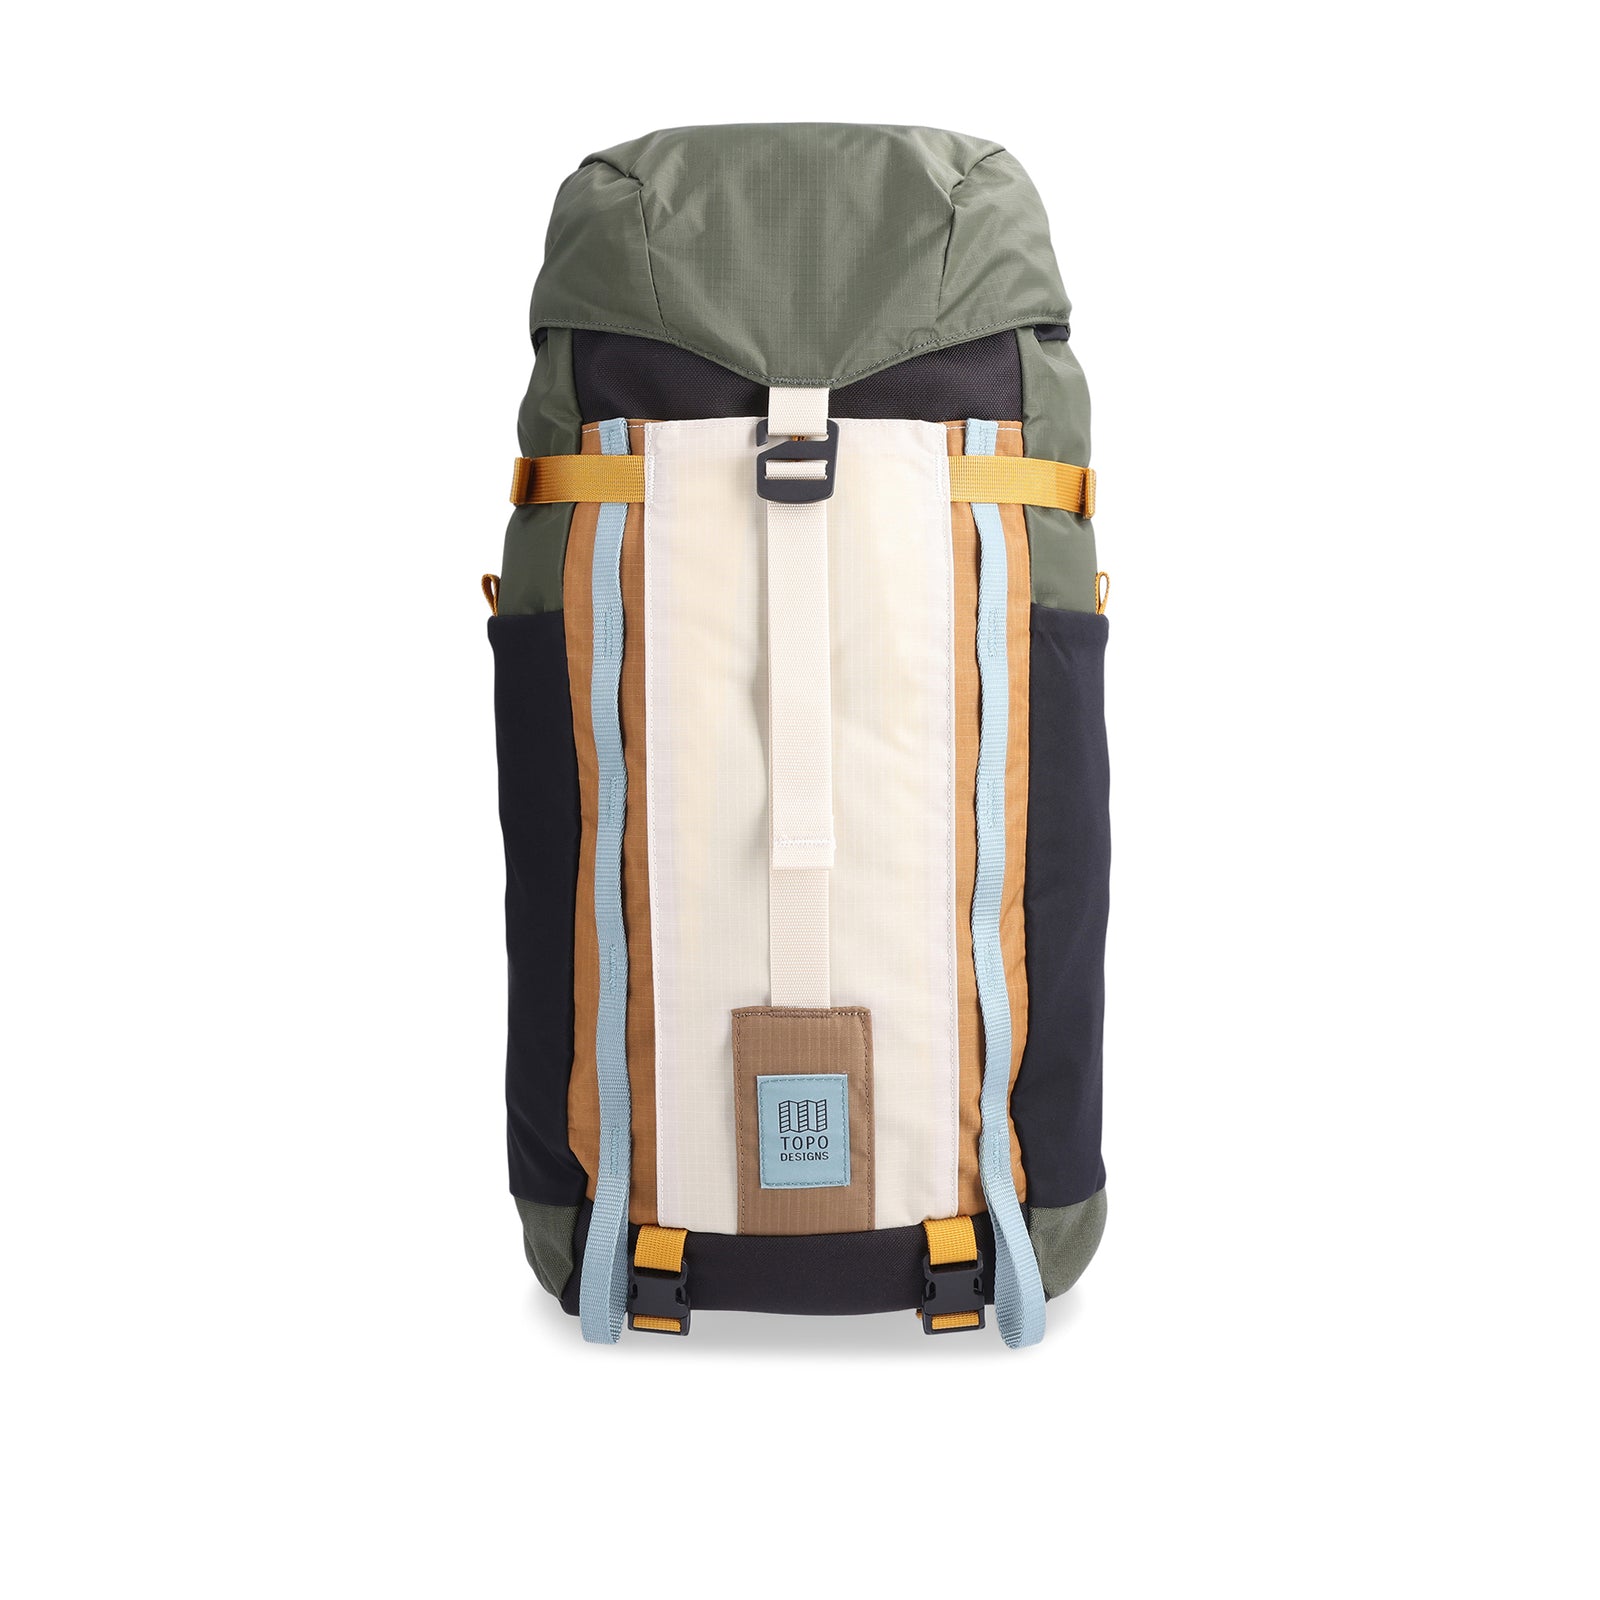 Topo Designs Mountain Pack 16L hiking backpack with internal laptop sleeve in lightweight recycled nylon "Bone White / Olive".